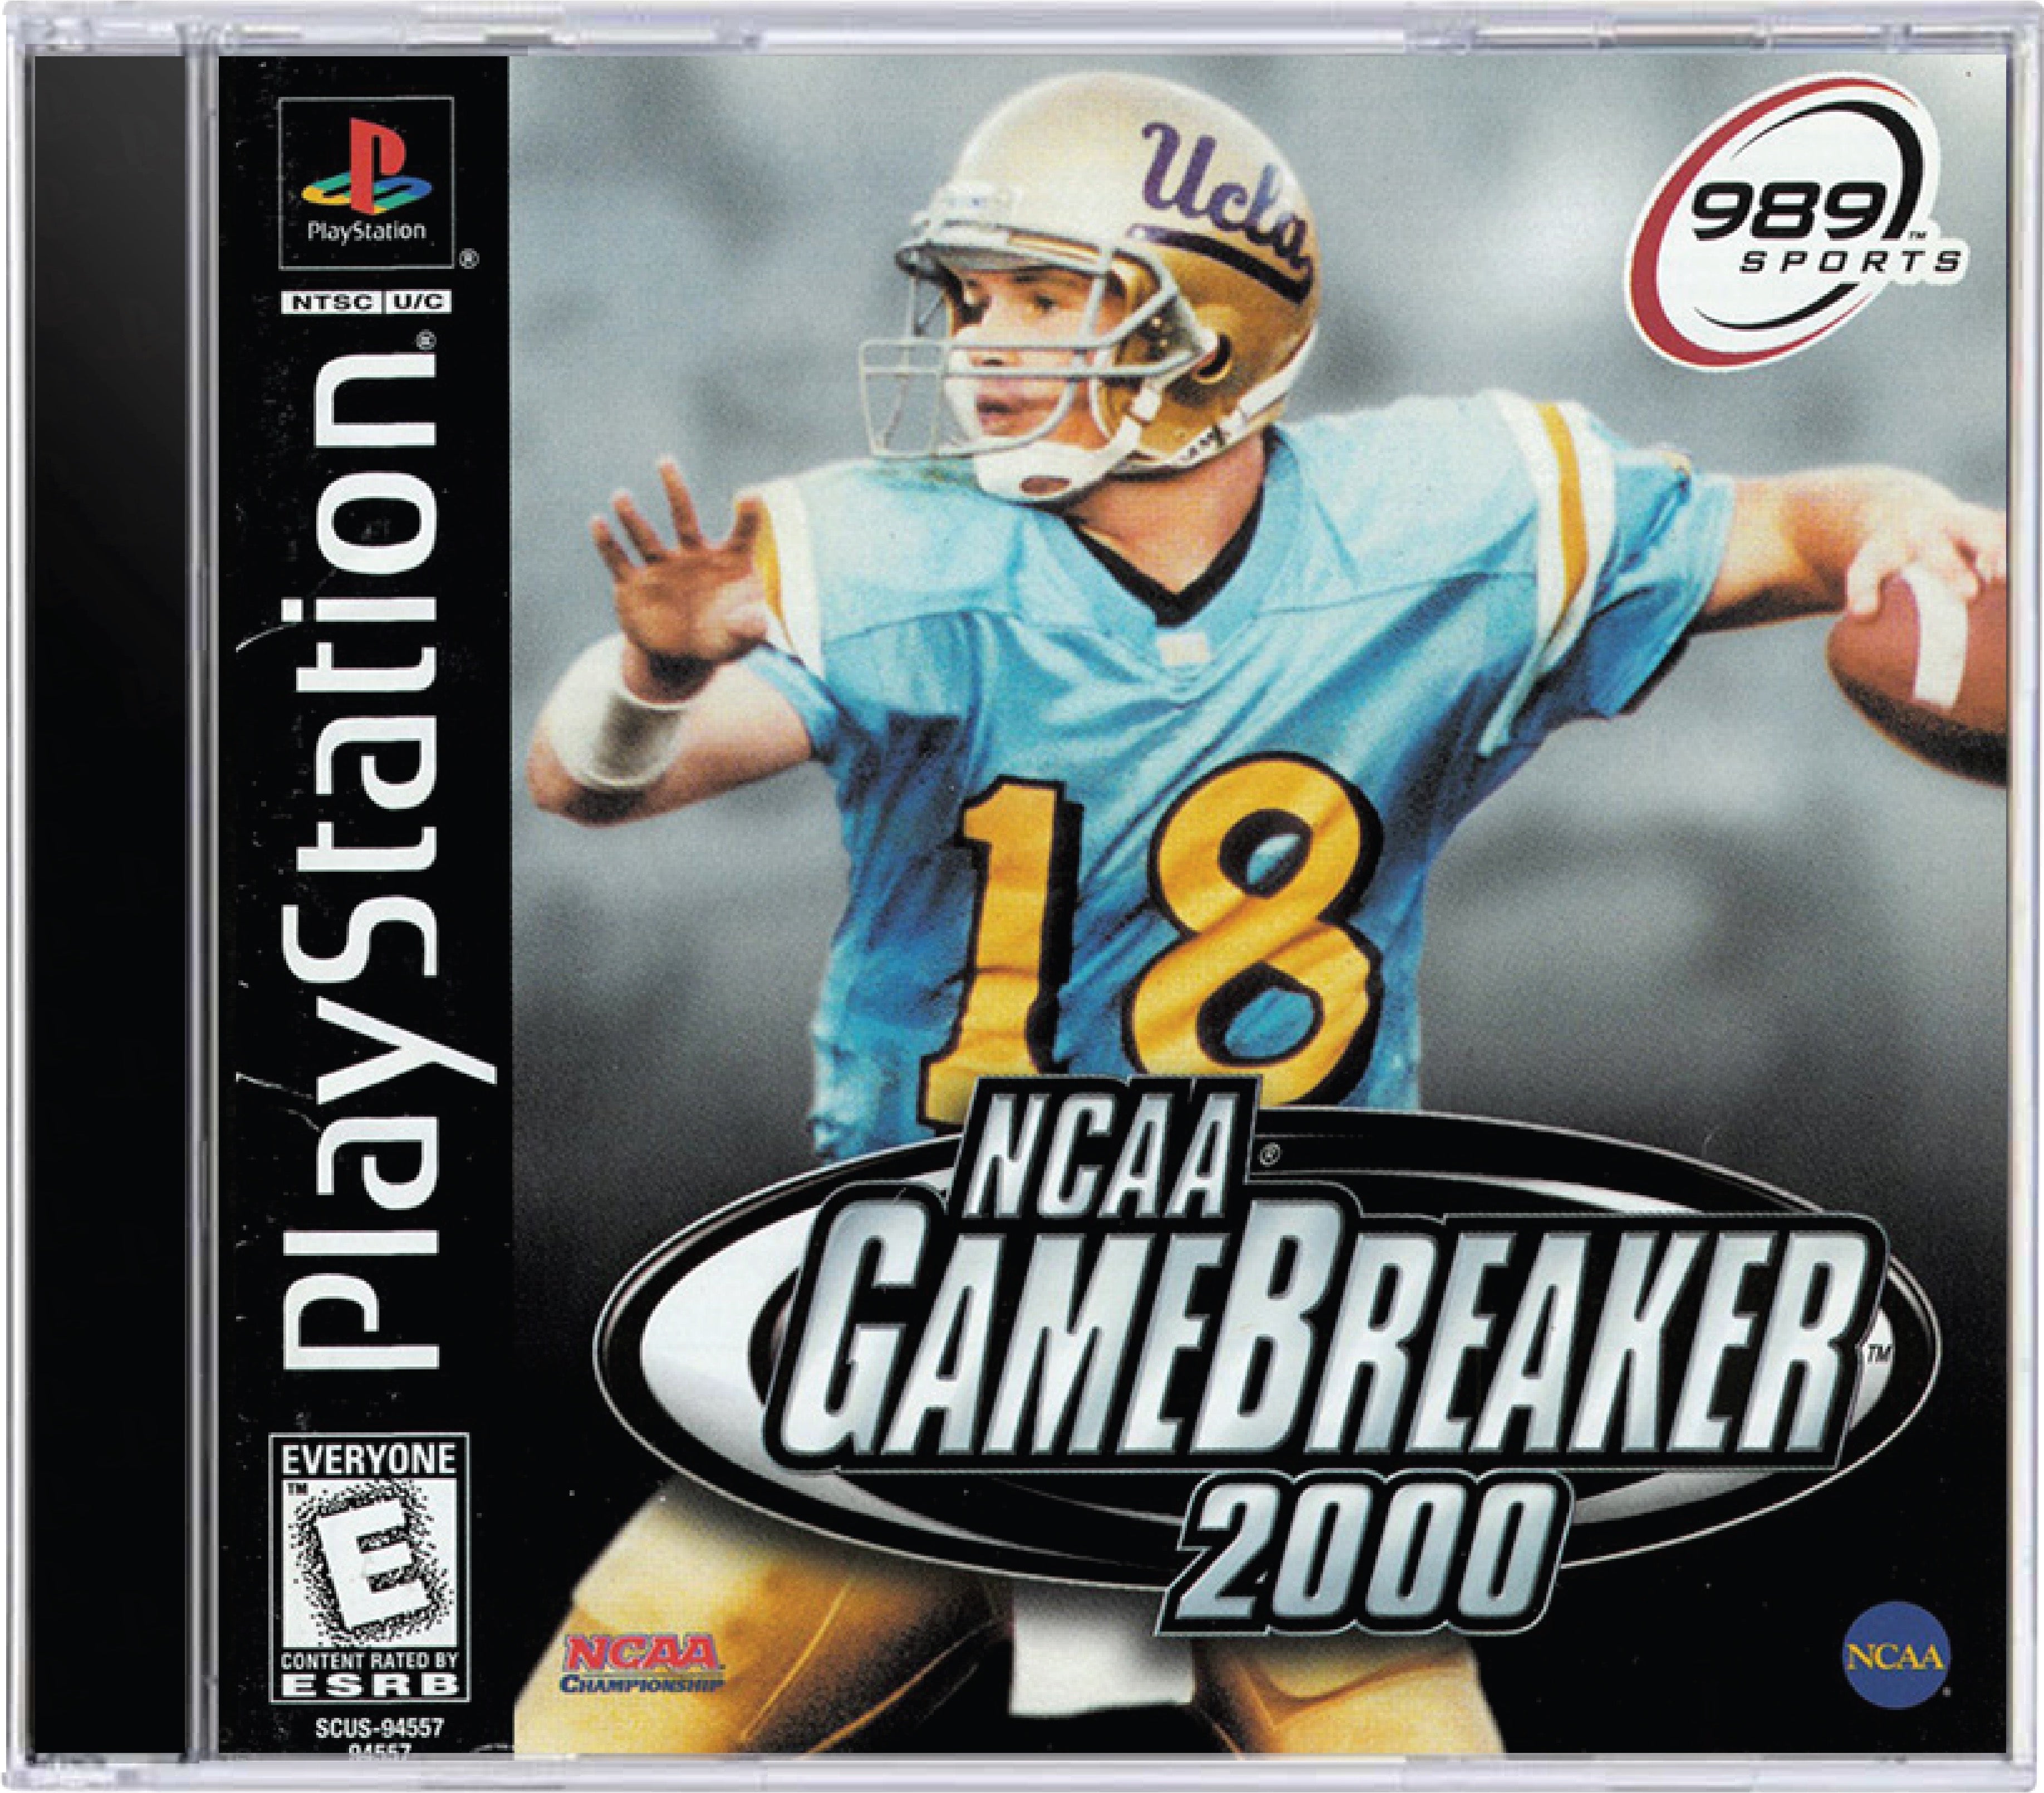 NCAA GameBreaker 2000 Cover Art and Product Photo